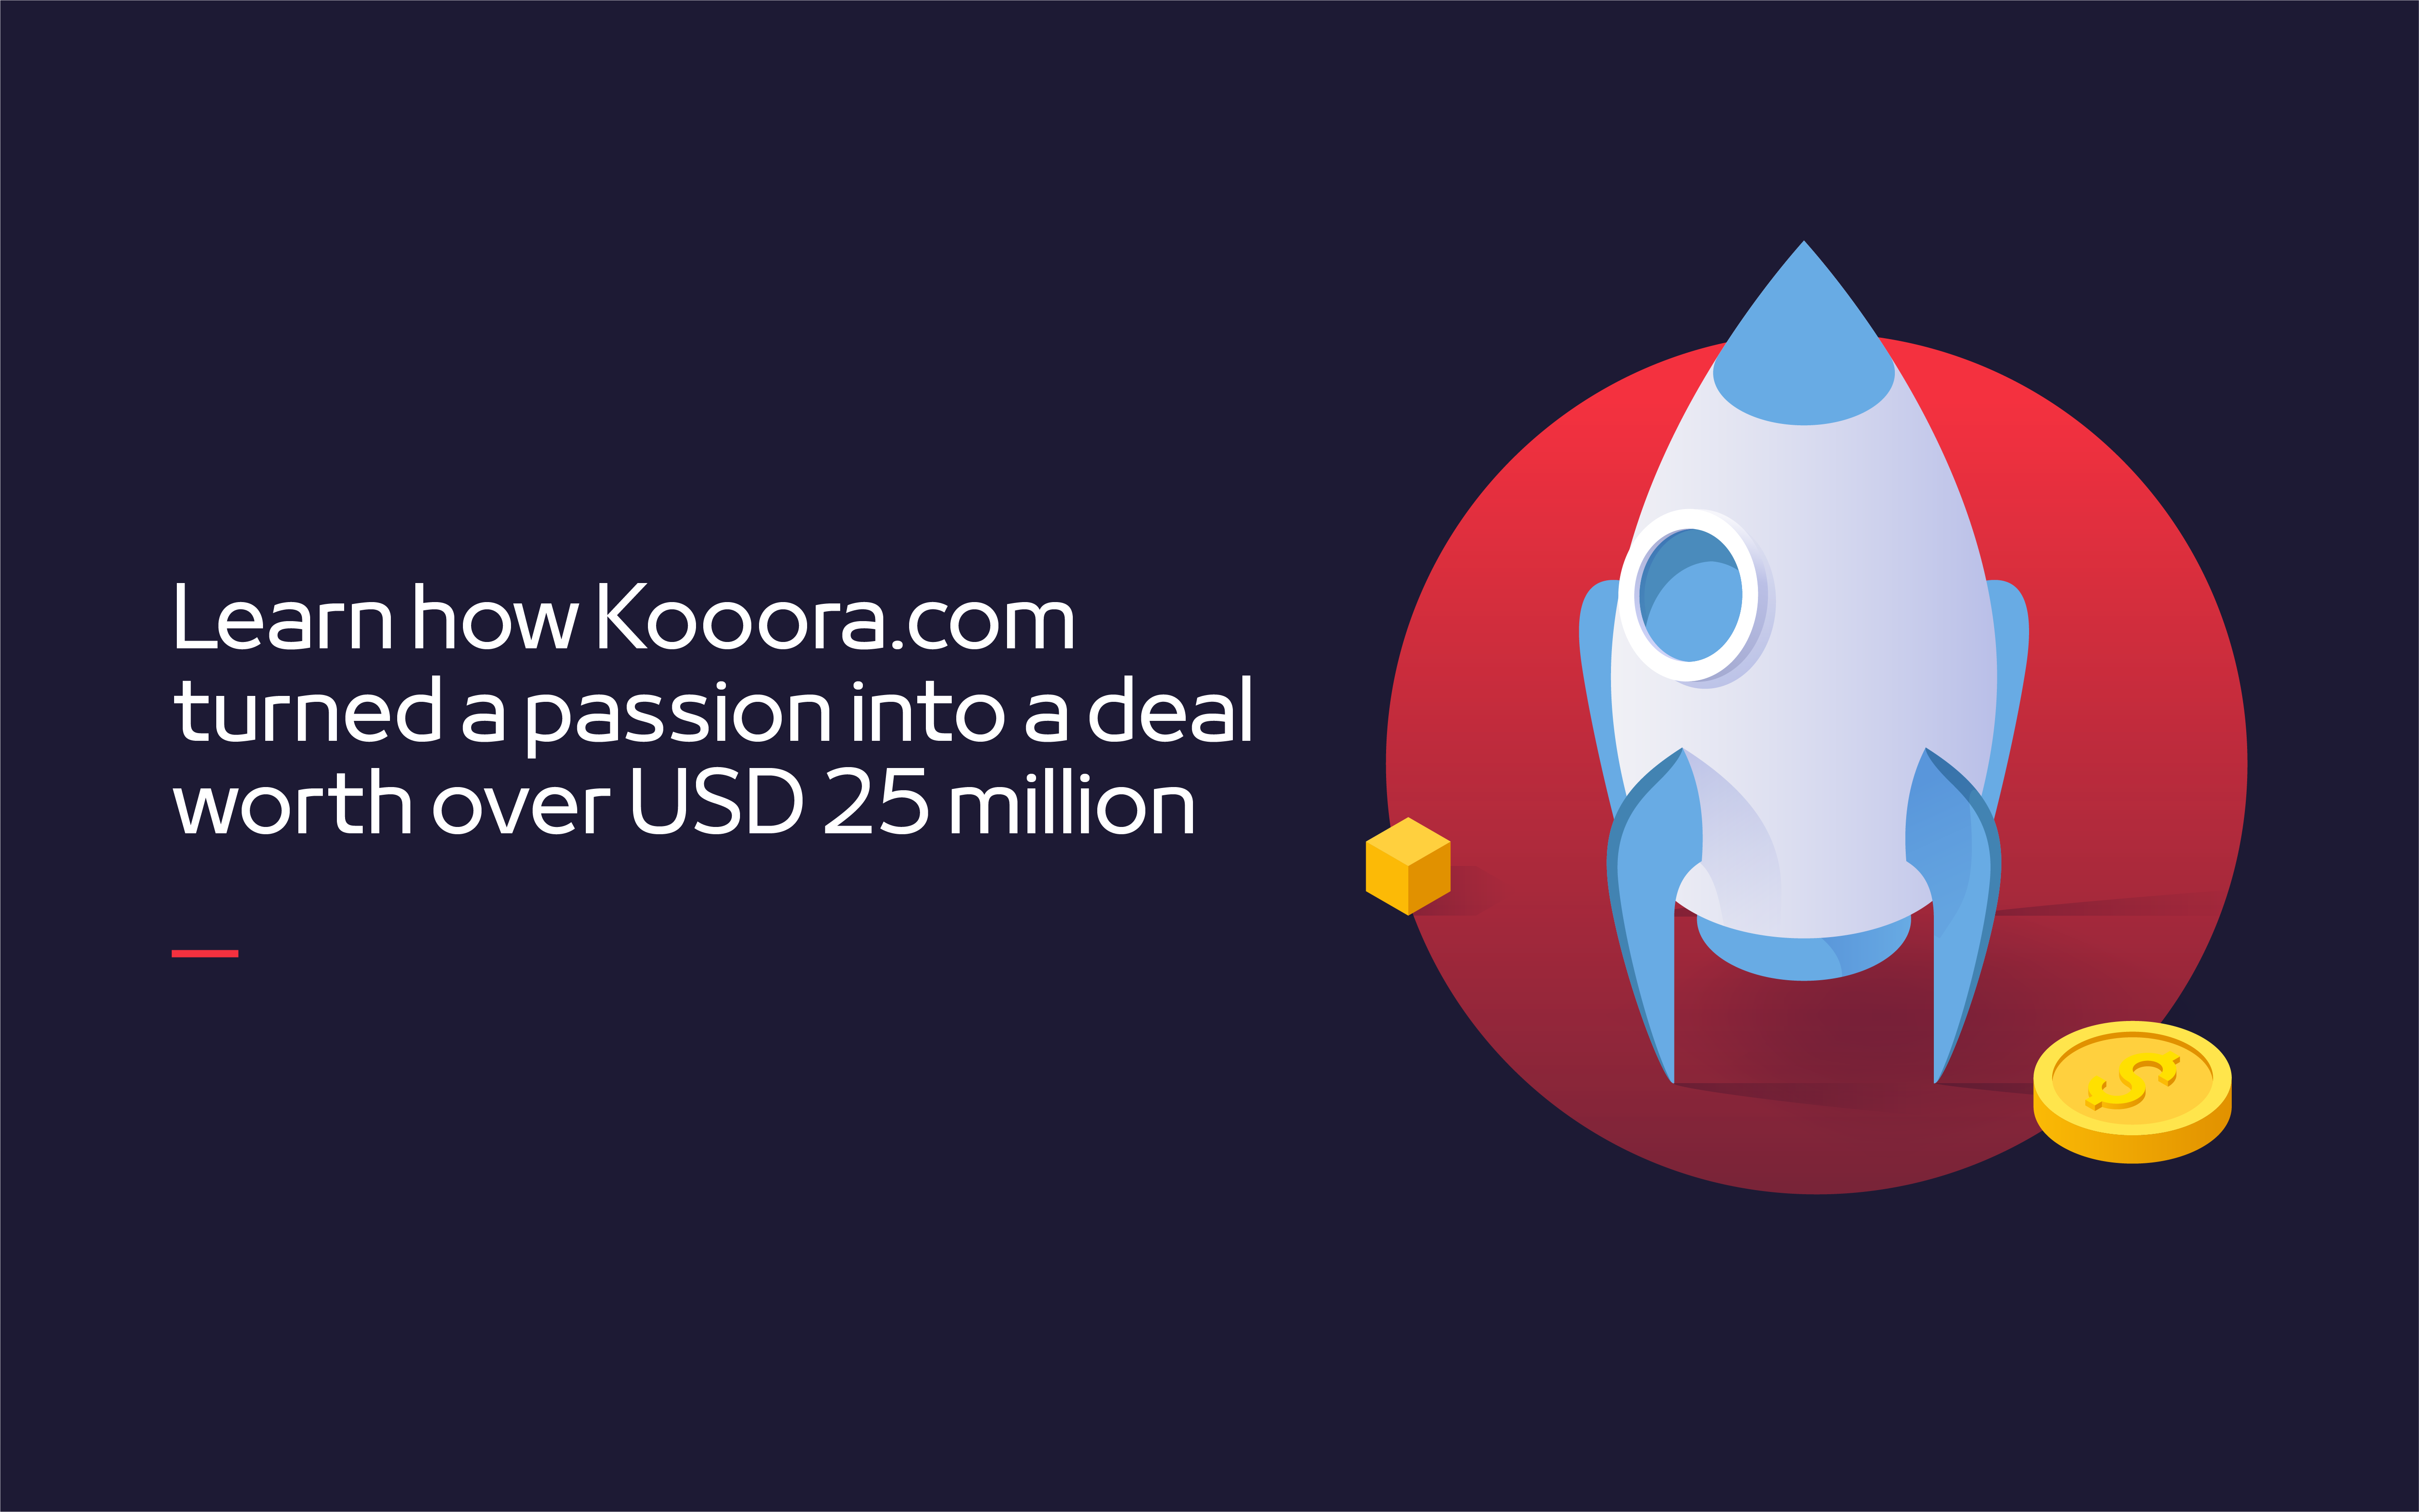 Kooora.com: the passion that turned into a deal worth over USD 25 million deal